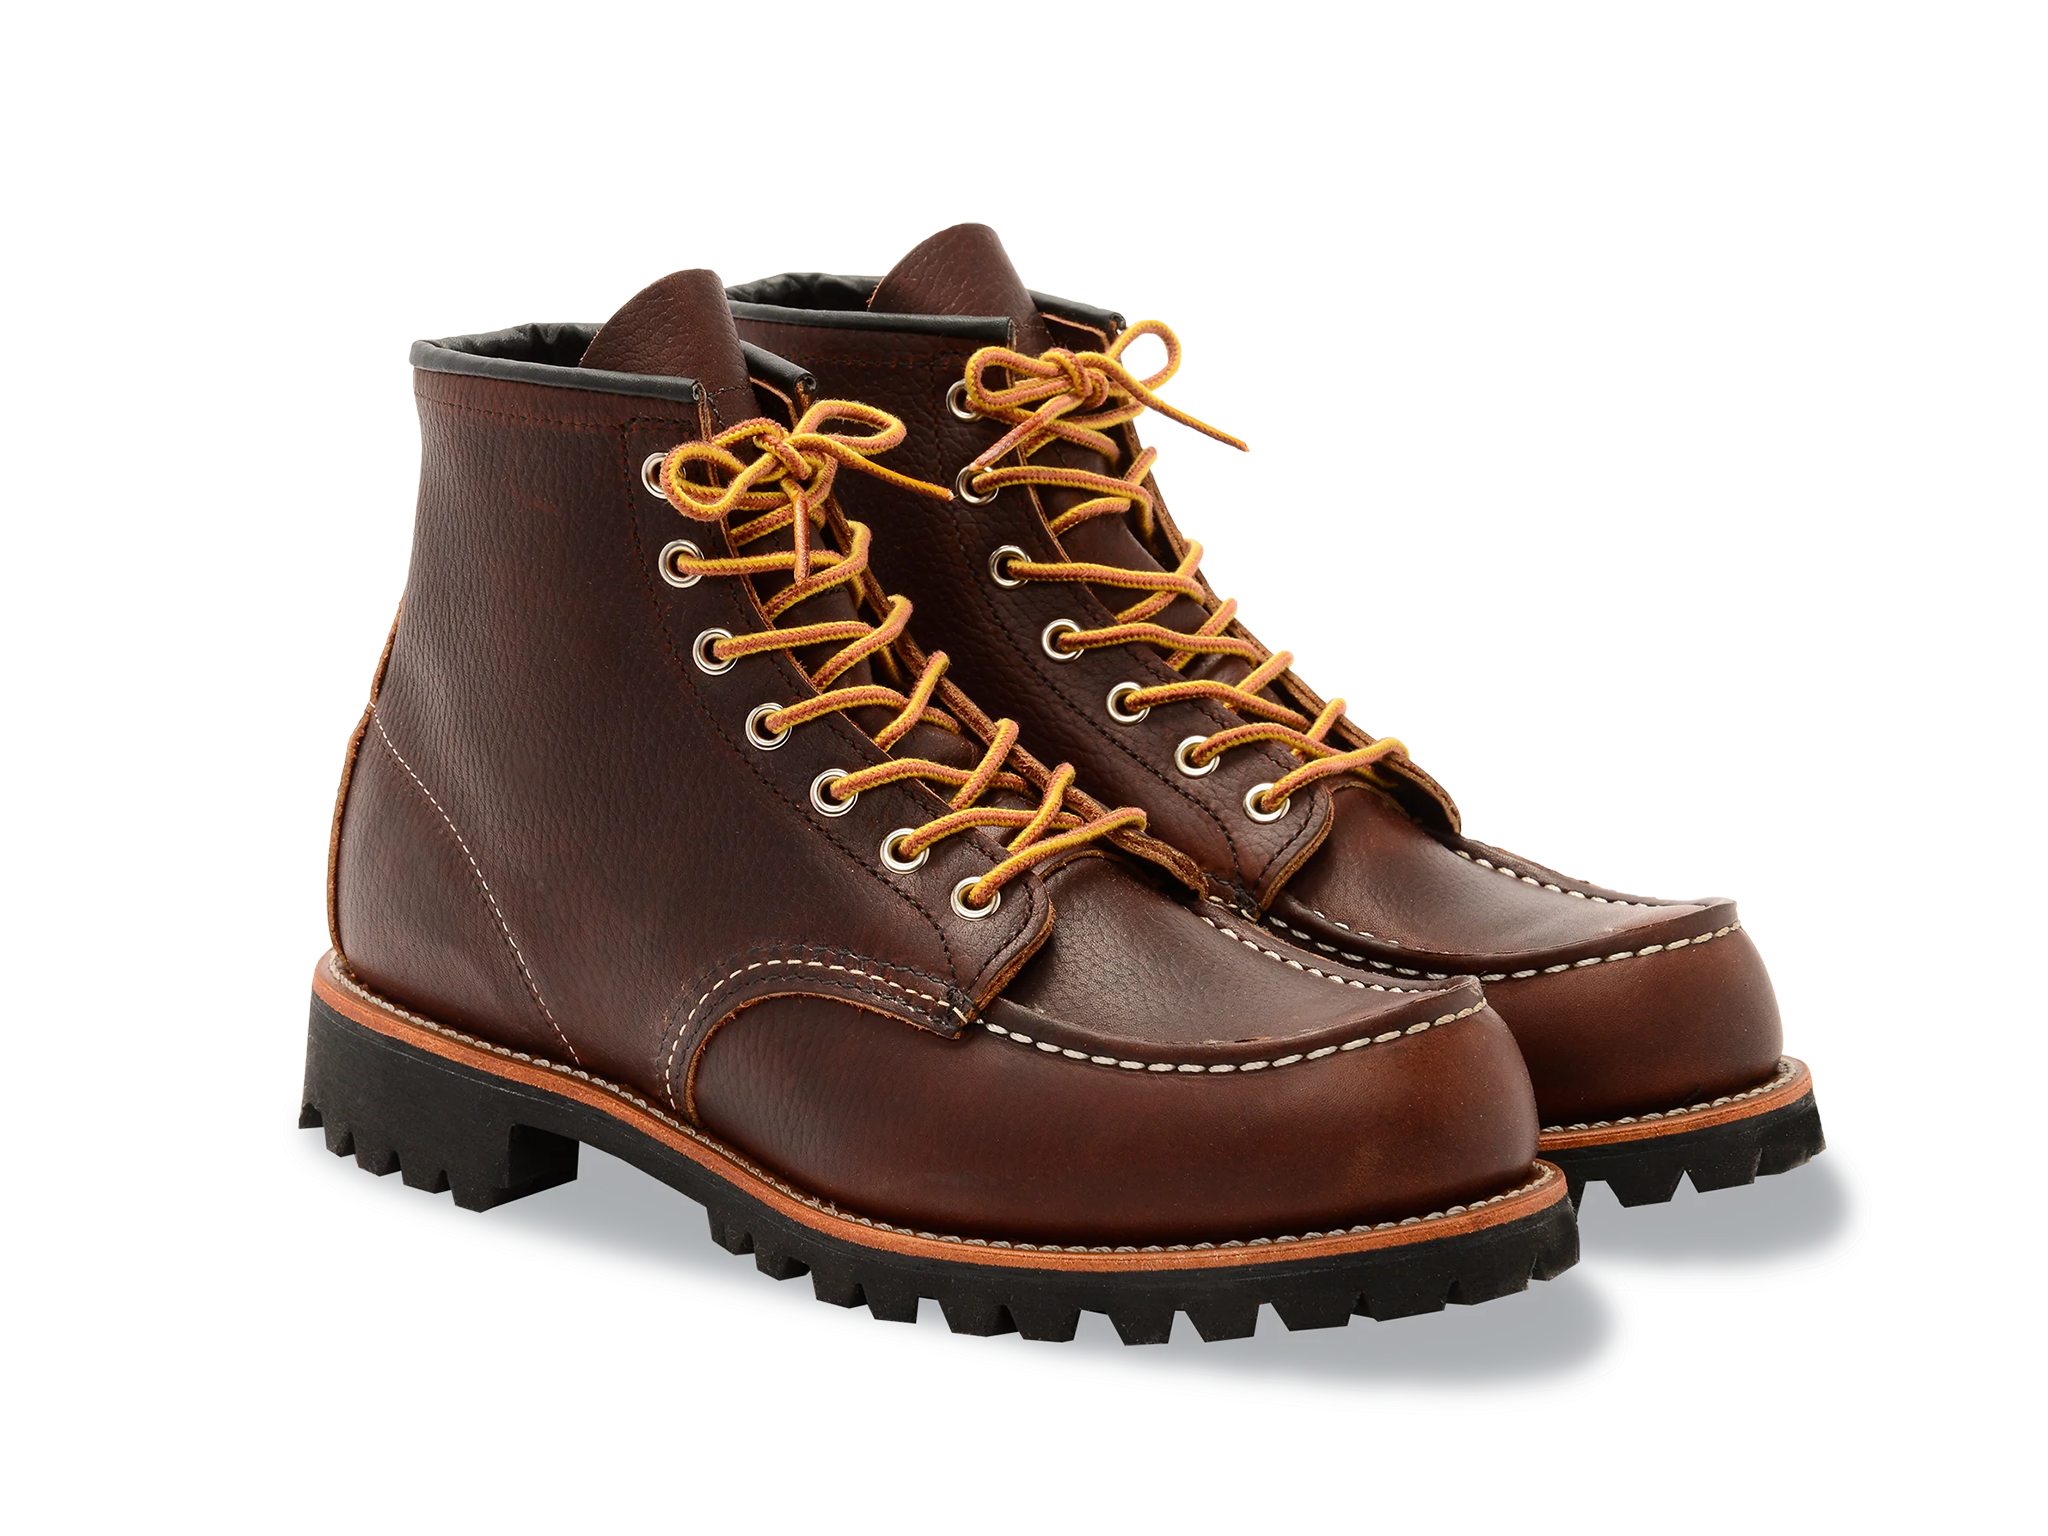 Red Wing roughneck